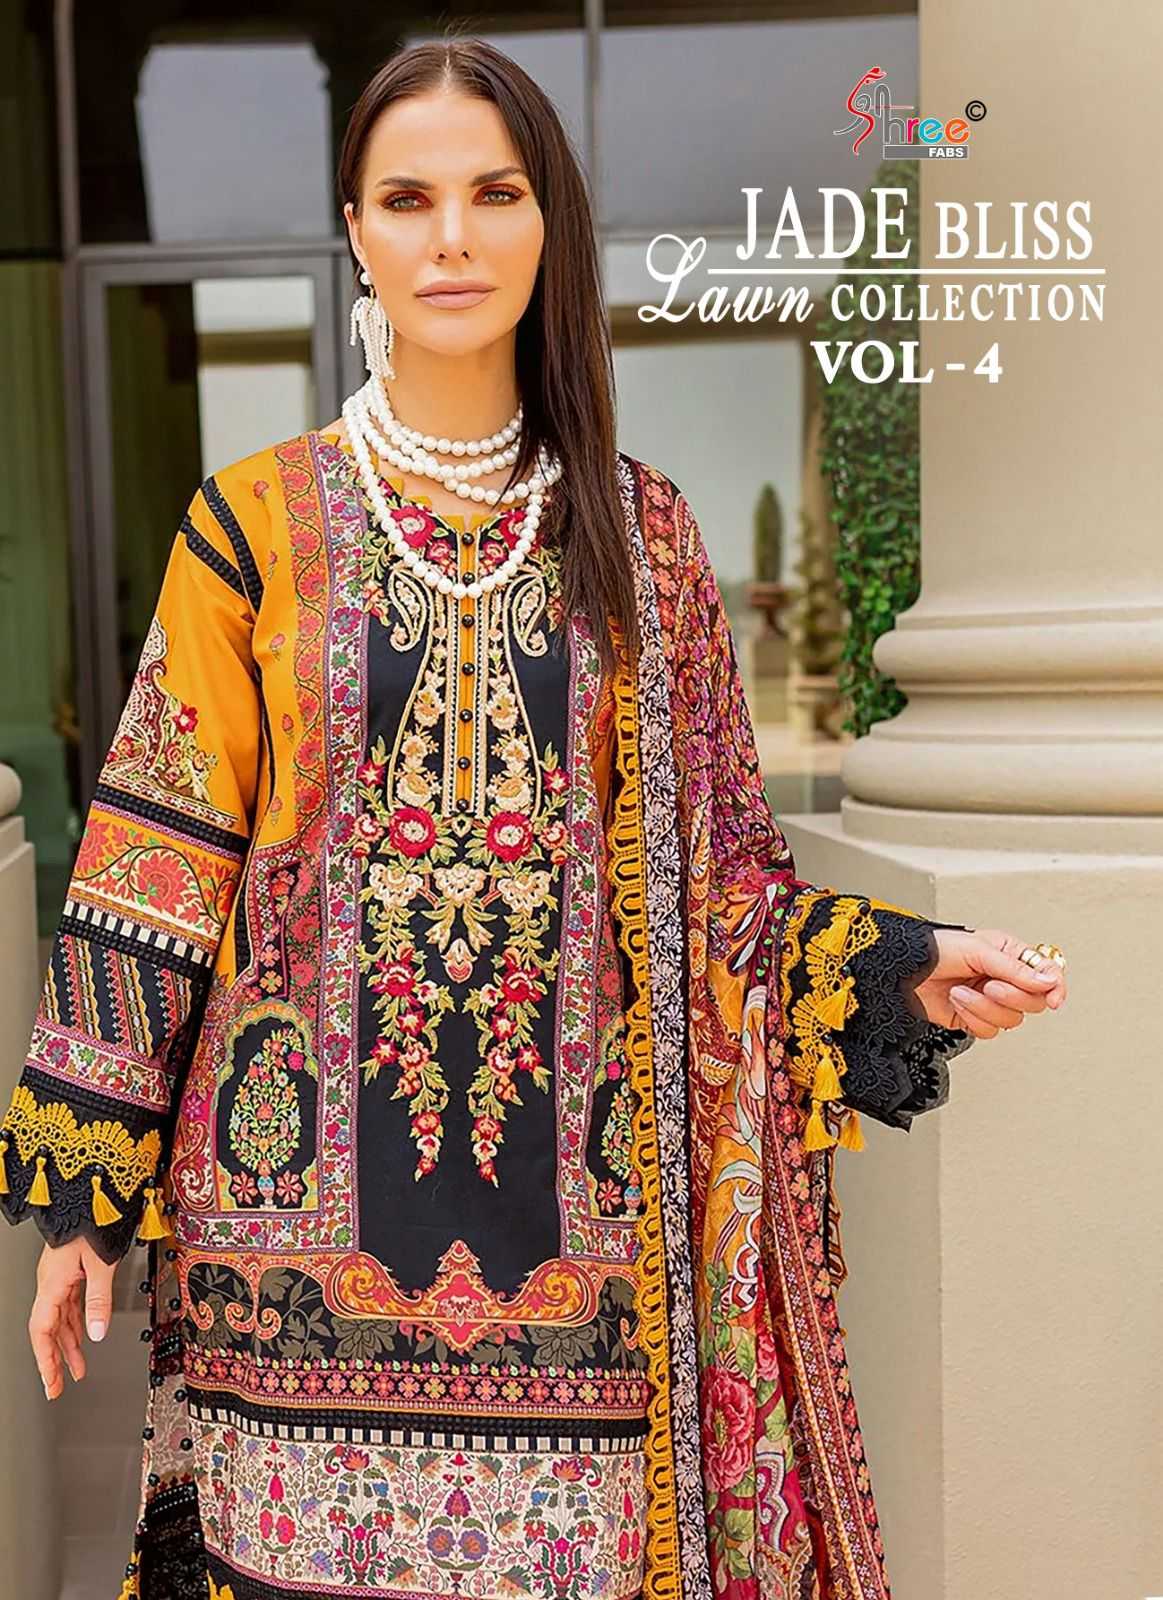 shree fab jade bliss lawn collection vol 4 pakistani patch work unstitch suit